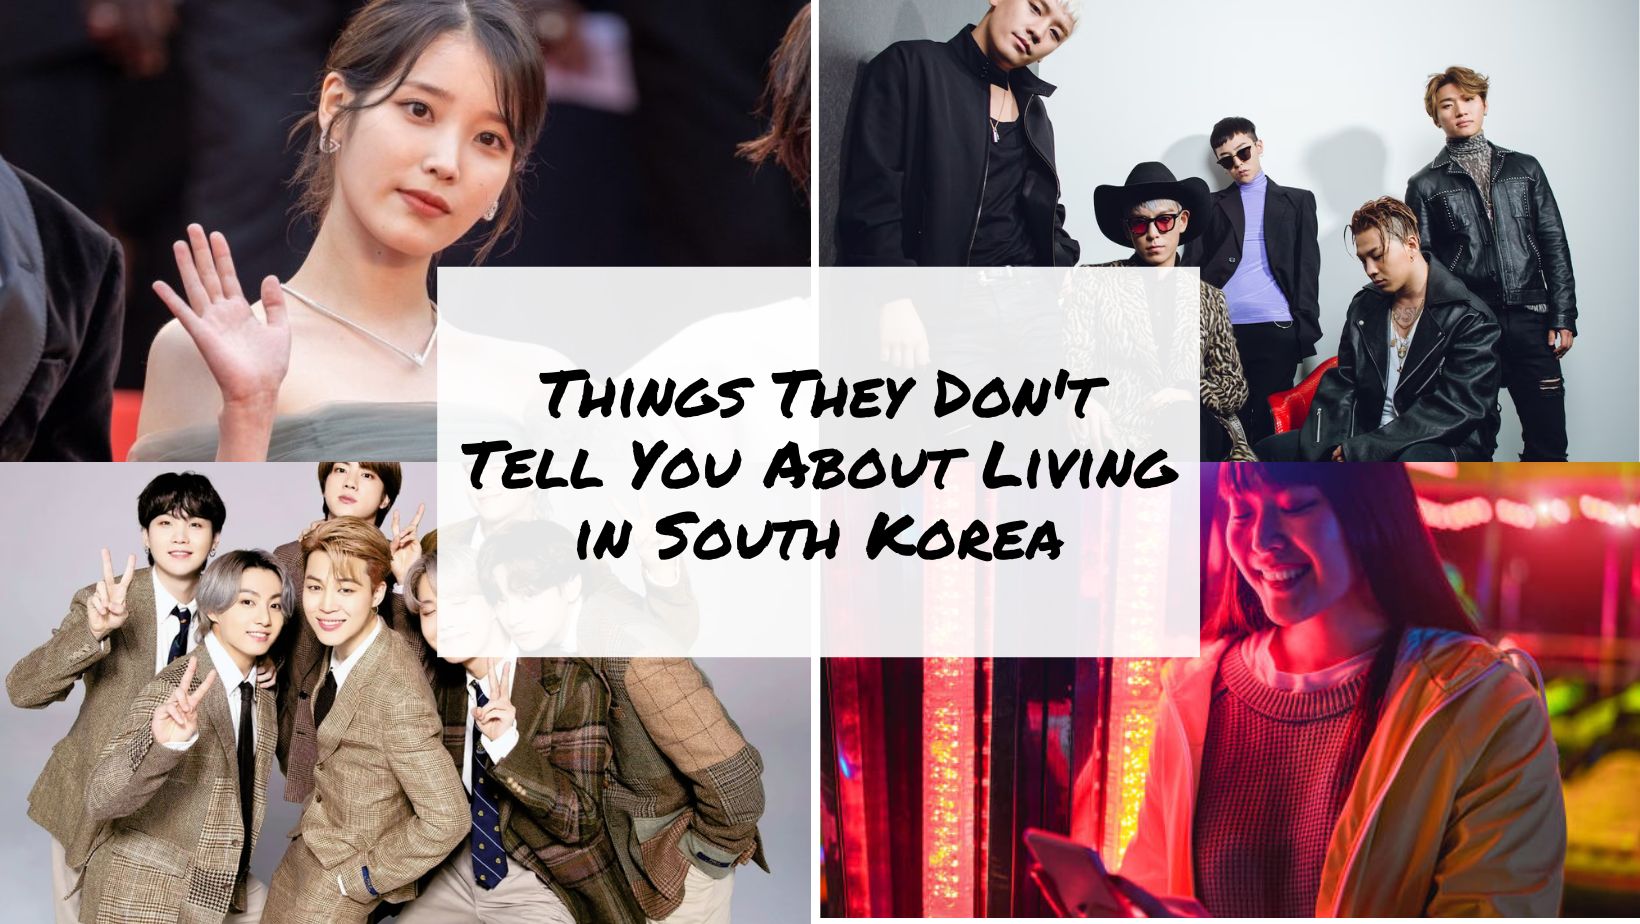 Things They Don't Tell You About Living in South Korea